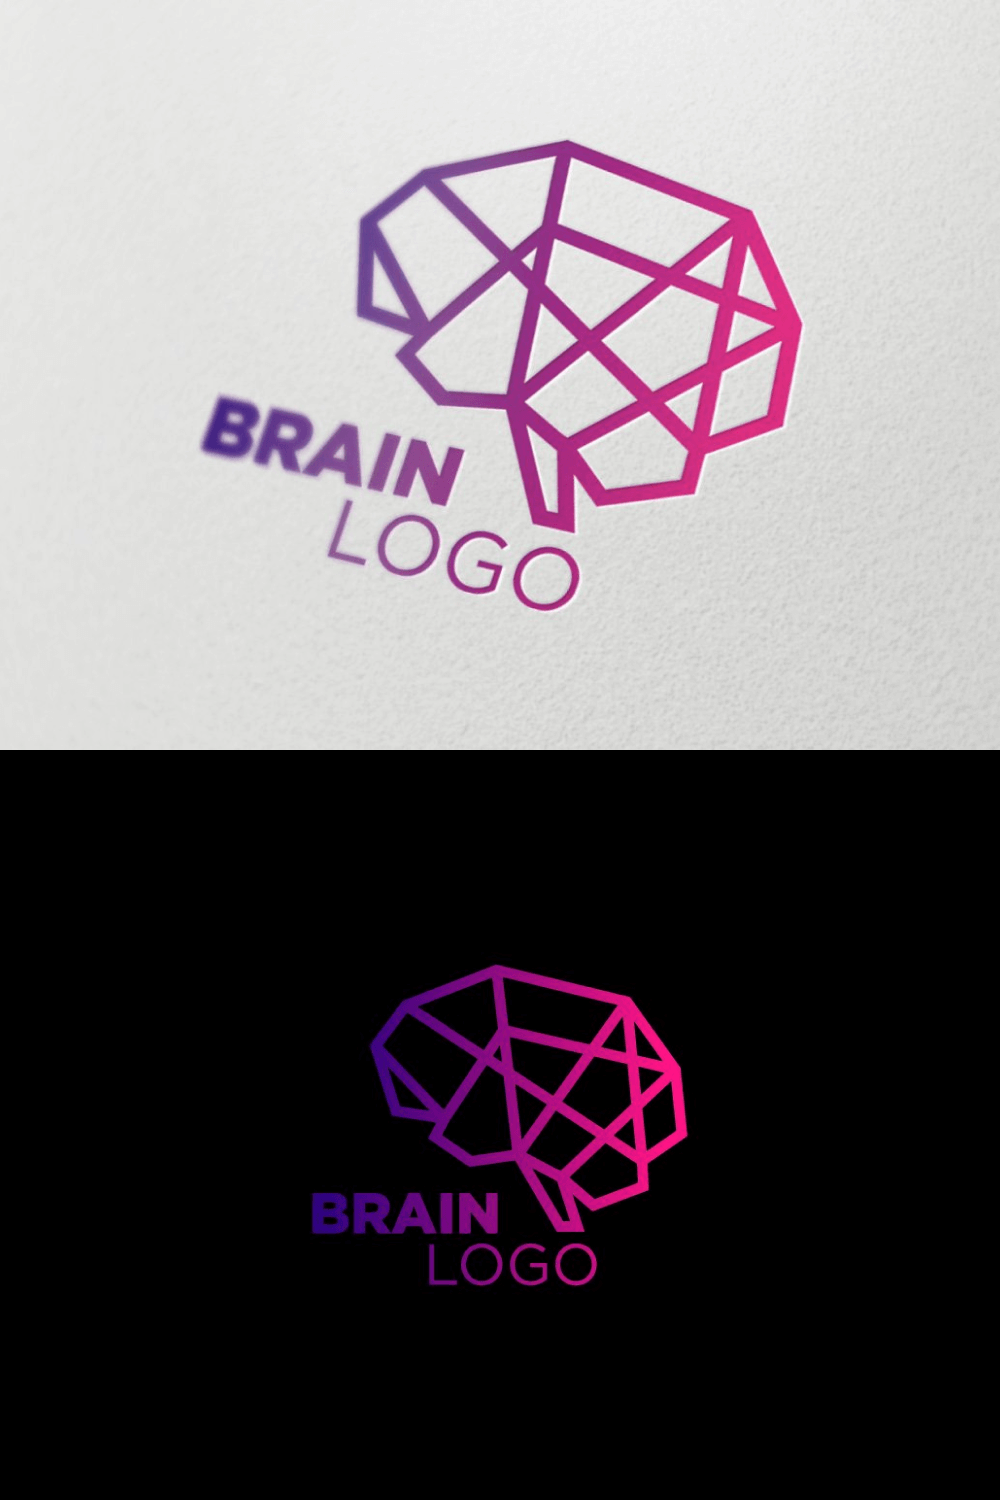 An interesting kind of logo for you.